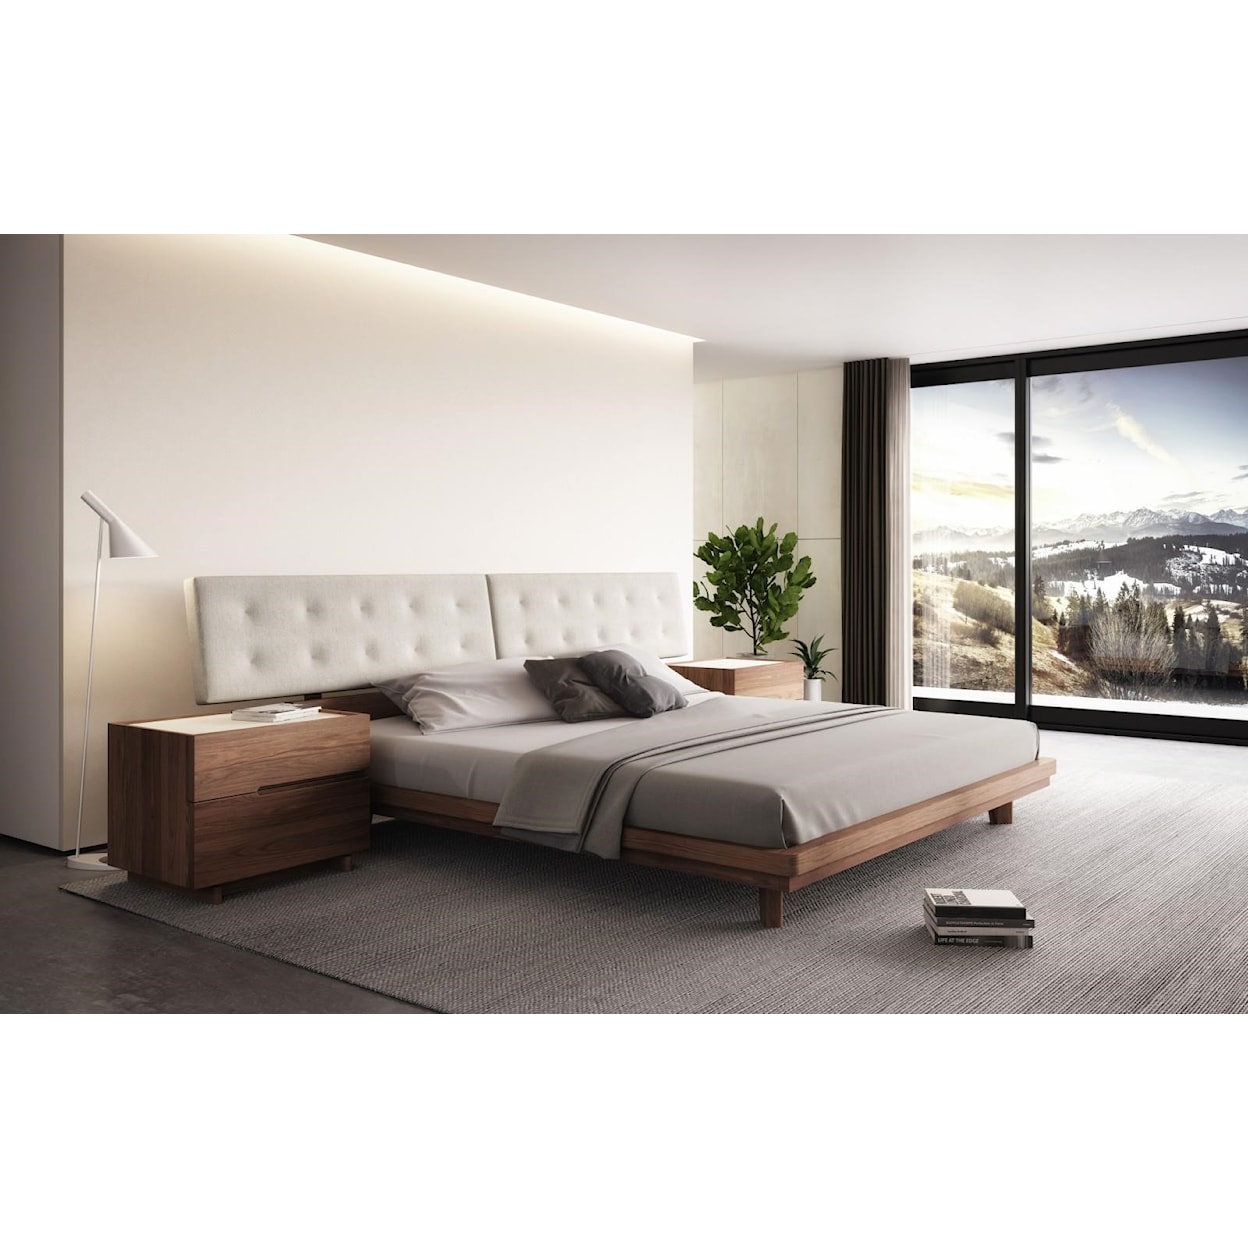 Huppe Nelson Platform Beds/Low Profile Beds